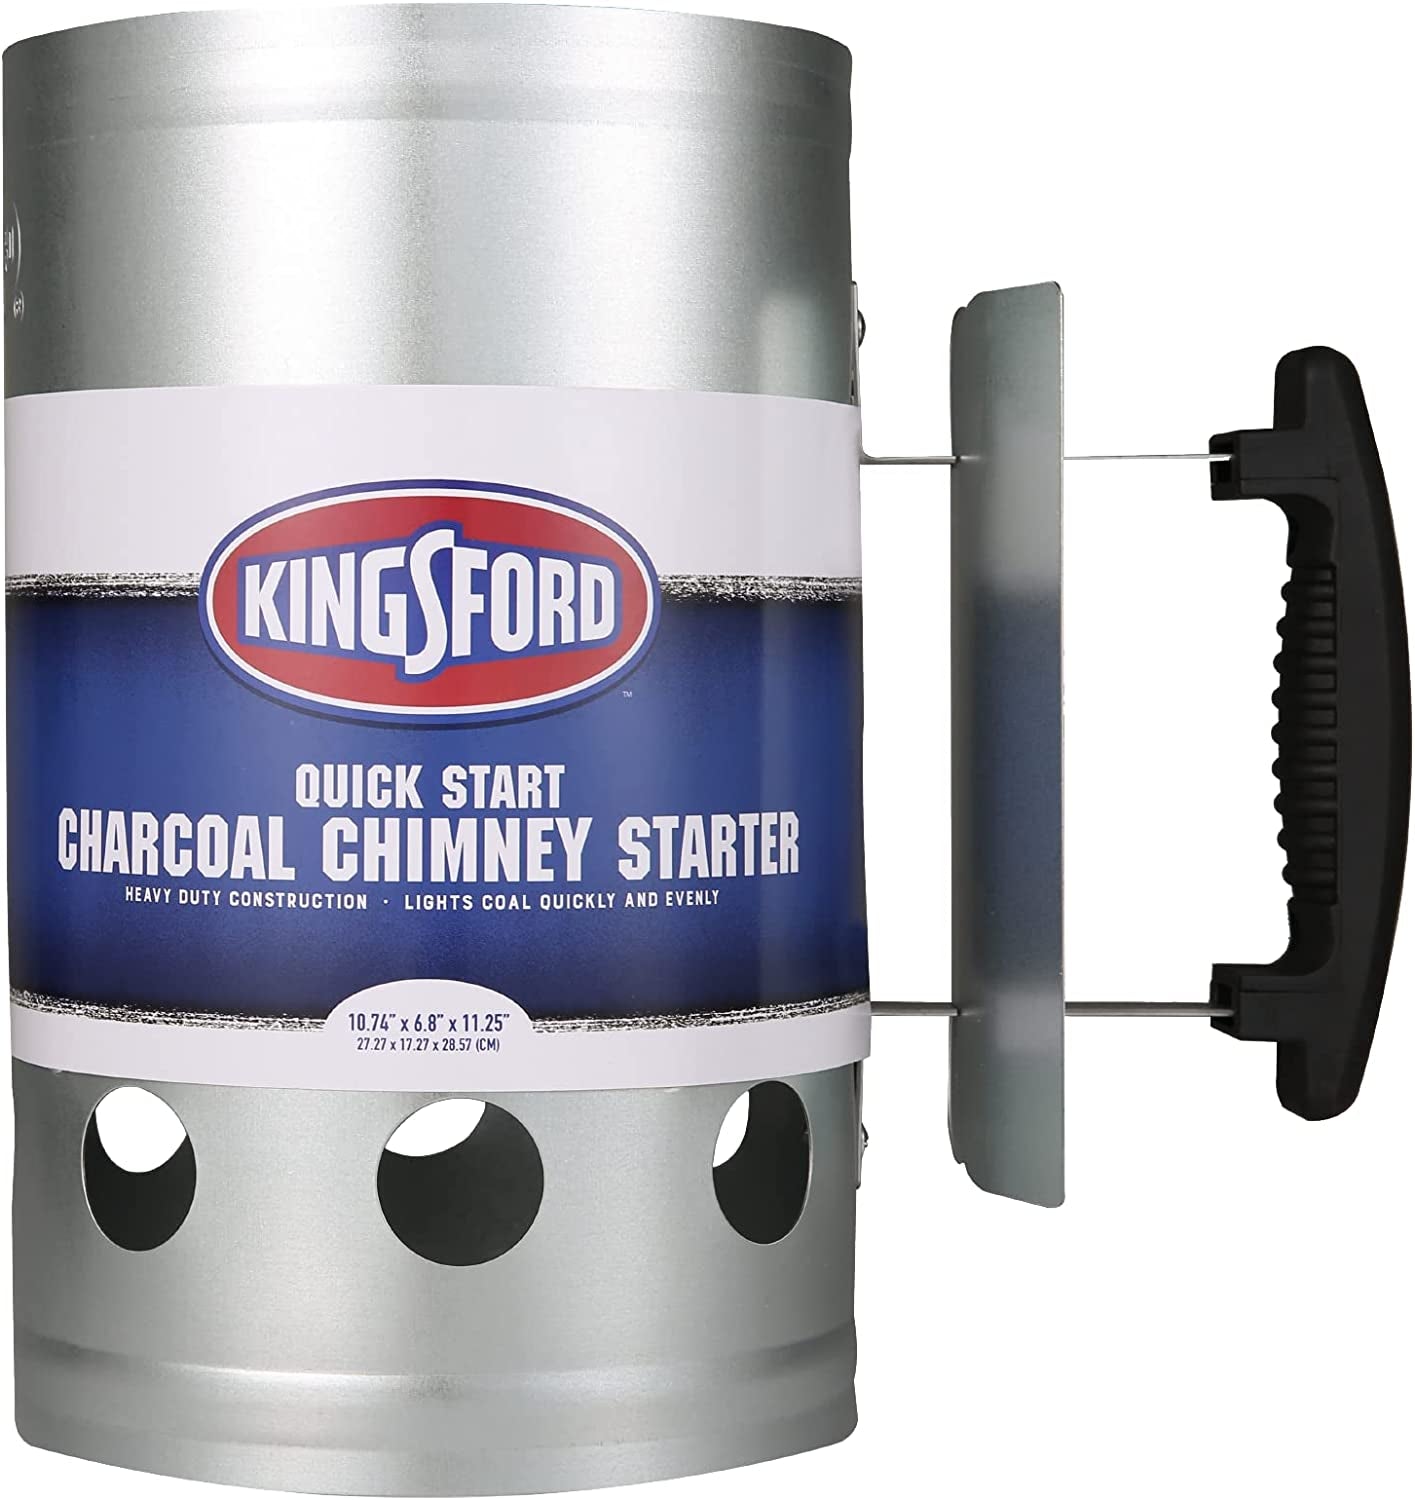 Kingsford, KINGSFORD Heavy Duty Deluxe Charcoal Chimney Starter | BBQ Chimney Starter for Charcoal Grill and Barbecues, Compact Easy to Use Chimney Starters and BBQ Grill Tools